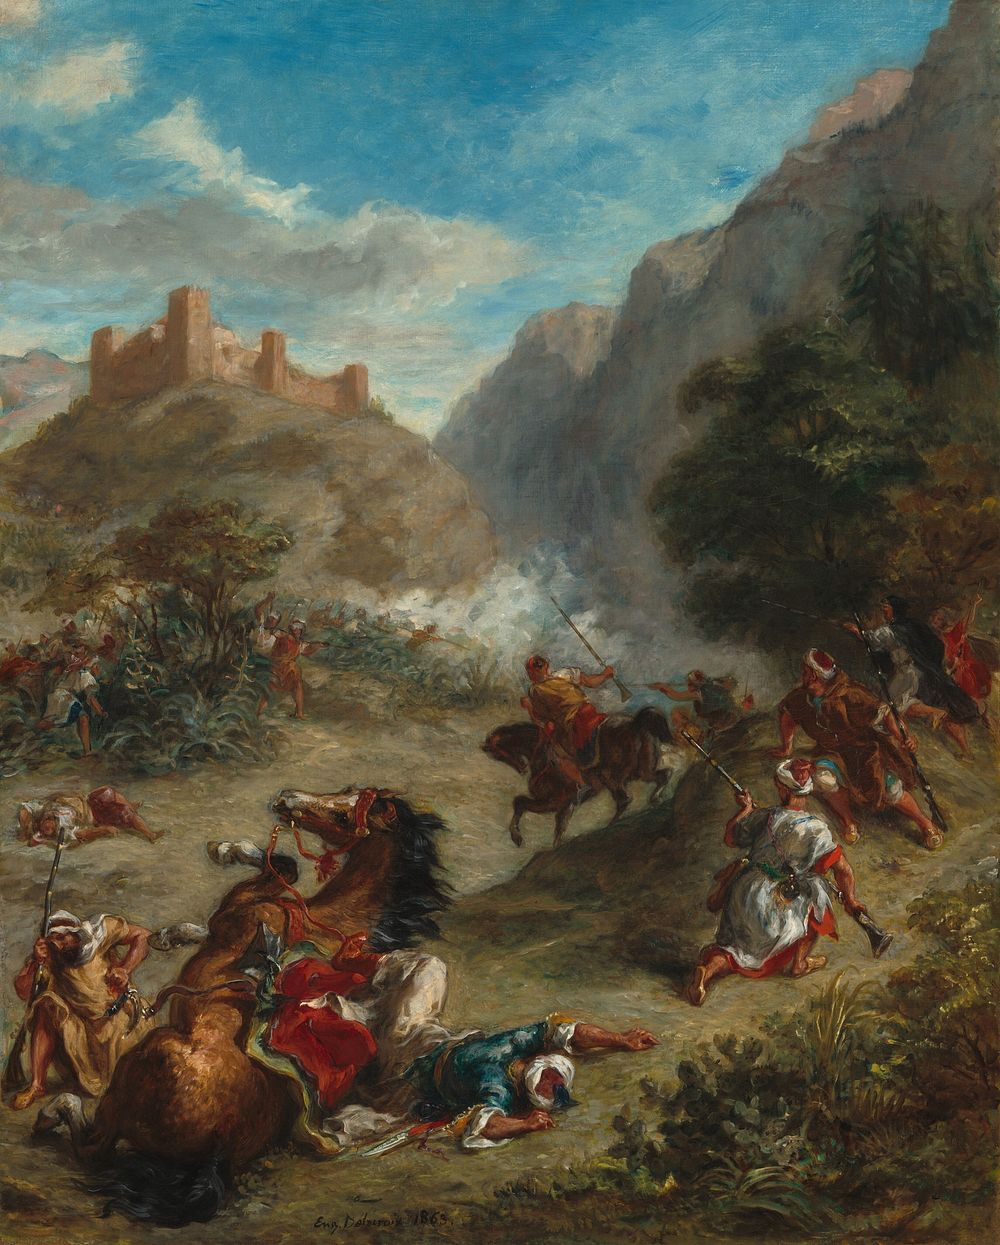 Arabs Skirmishing in the Mountains (1863) by Eug&egrave;ne Delacroix.  